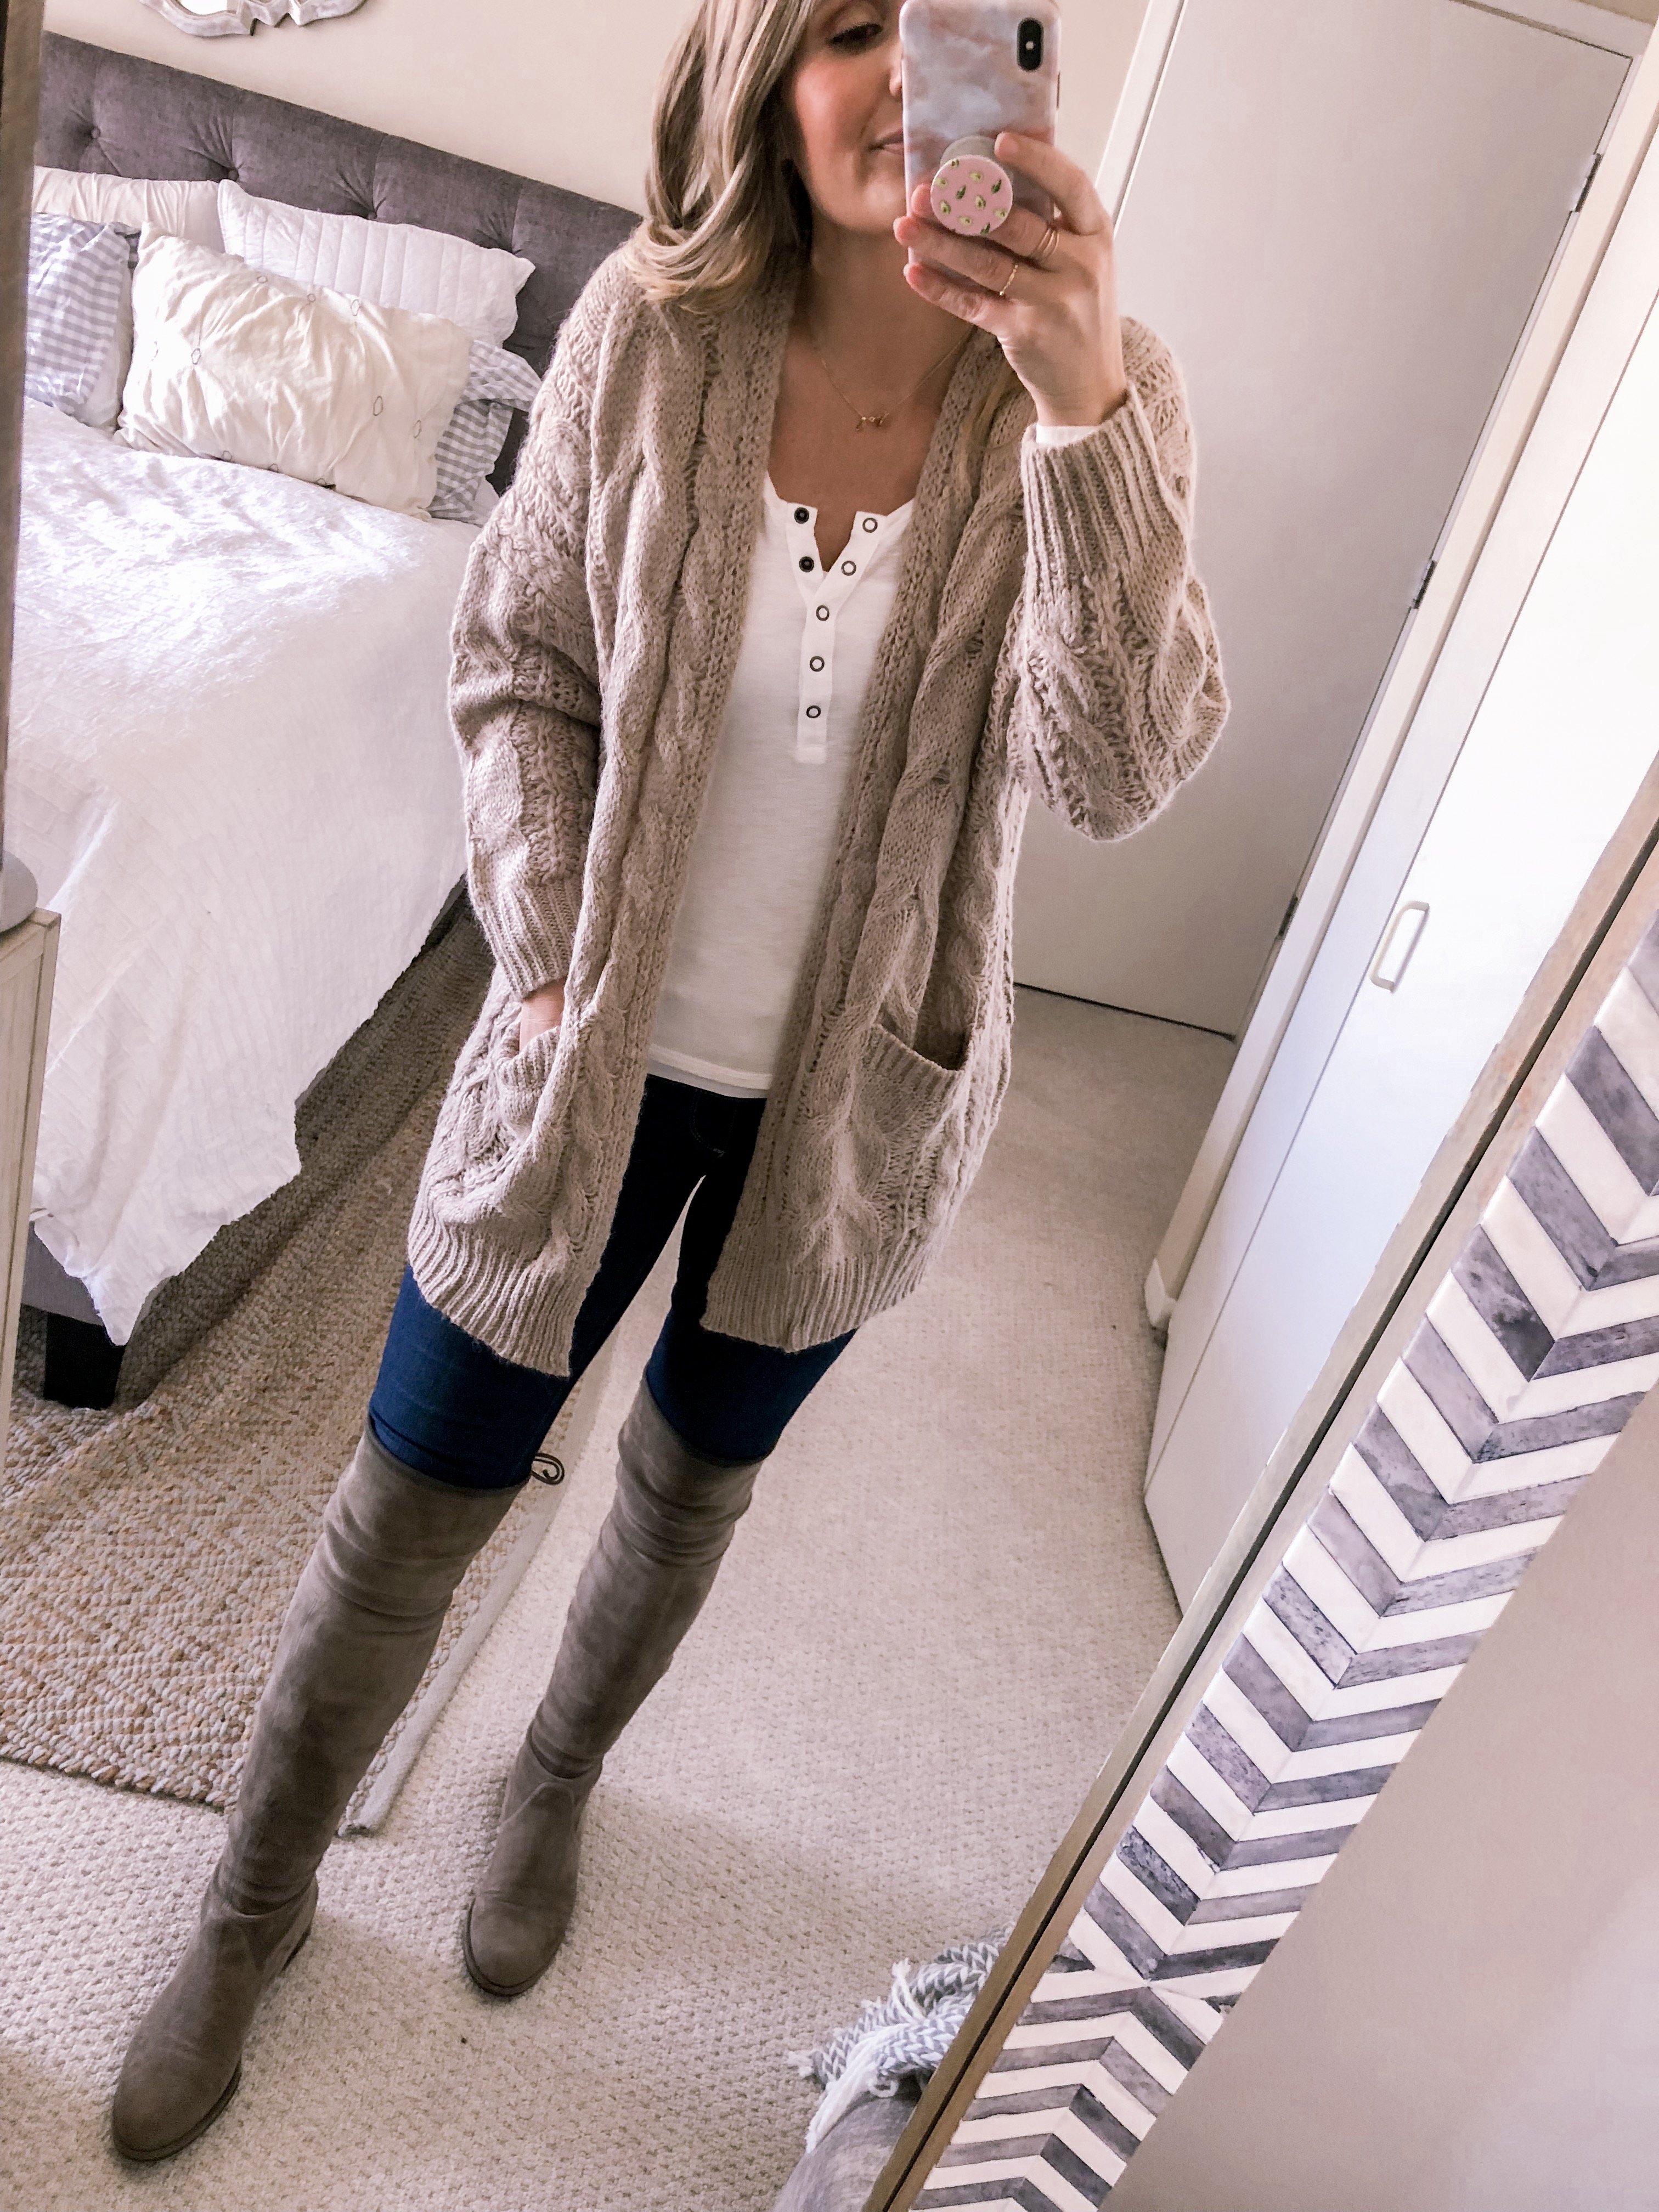 Popular Chicago fashion blogger Visiosn of Vogue styles a beige cardigan with a white henley and suede over the knee boots for an office outfit idea.